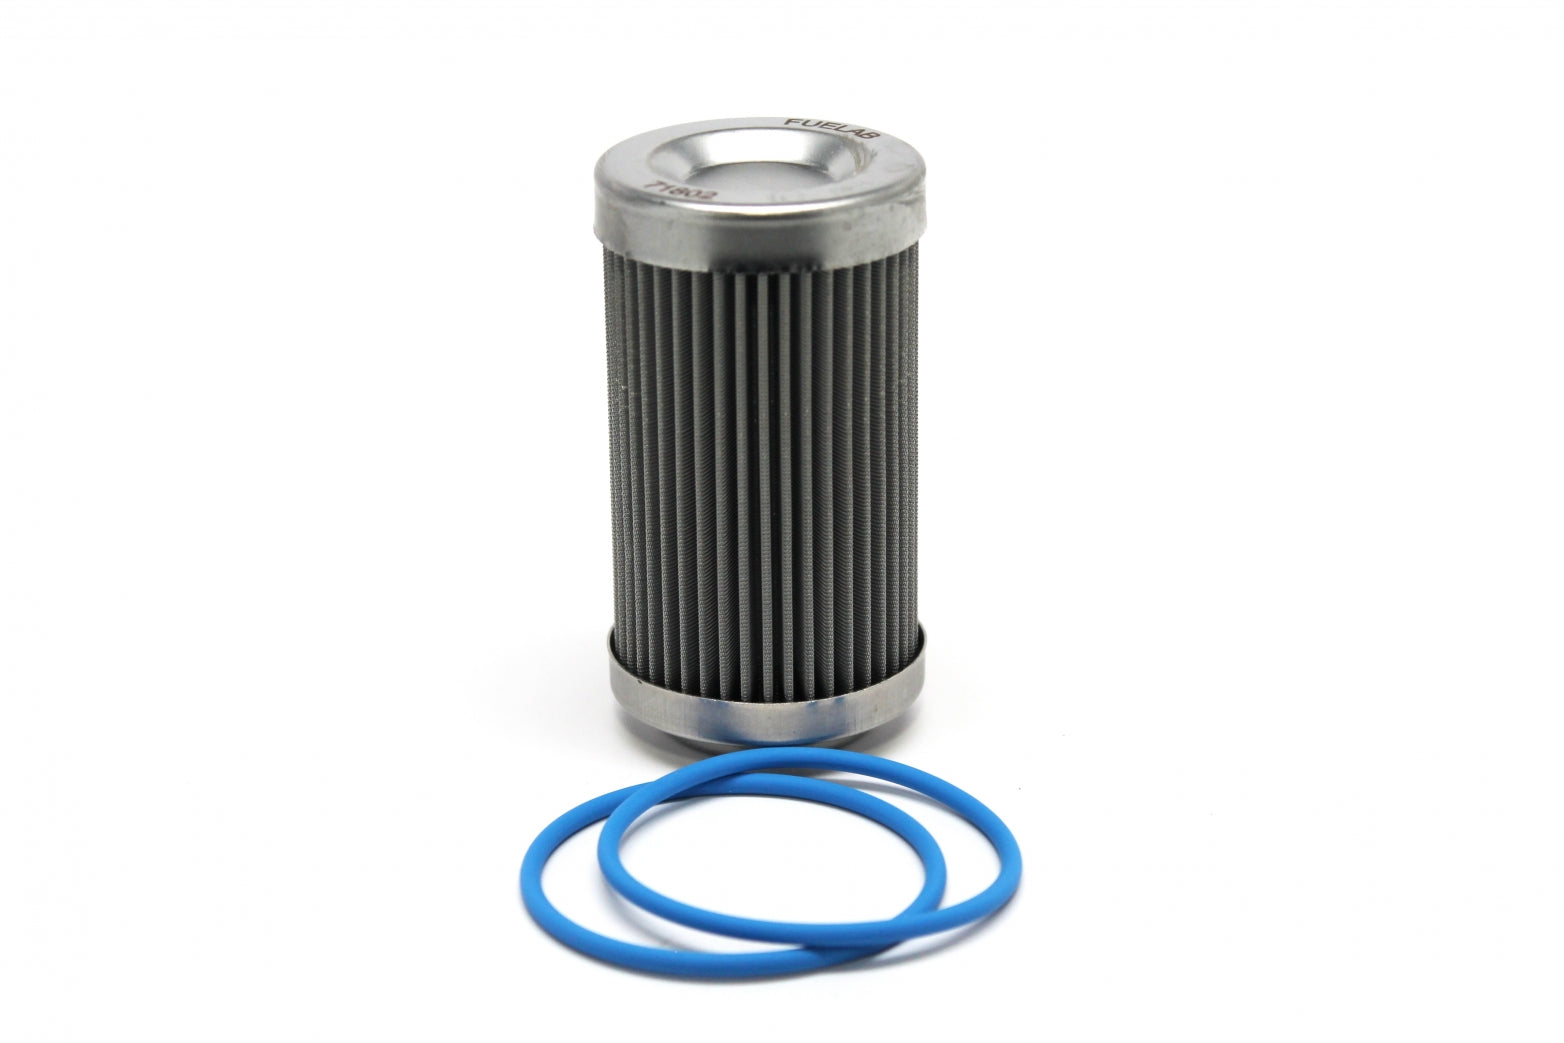 FUELAB 71803 Fuel Filter Replacement Element 3 inch 100 micron Stainless Steel Photo-0 